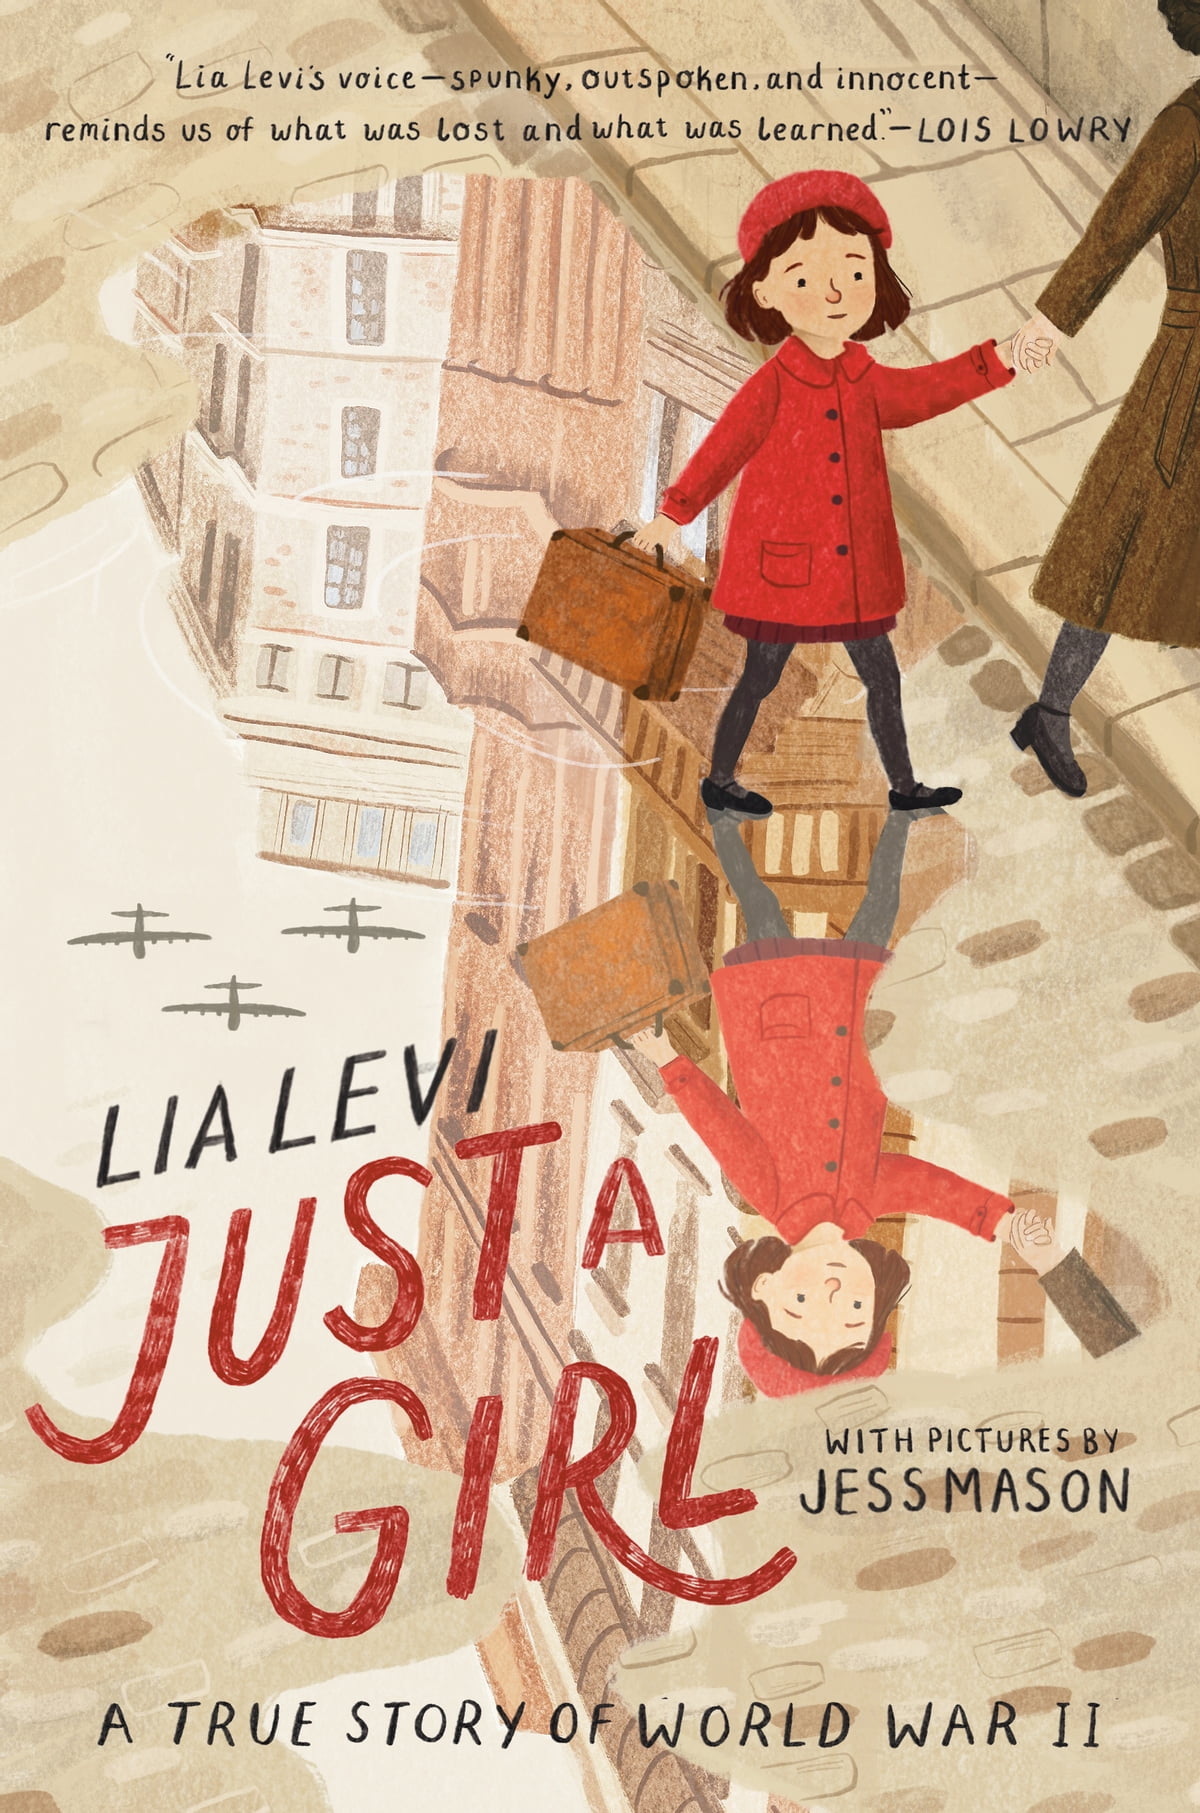 Just a Girl: A True Story of WWII book cover illustration of young girl in the city